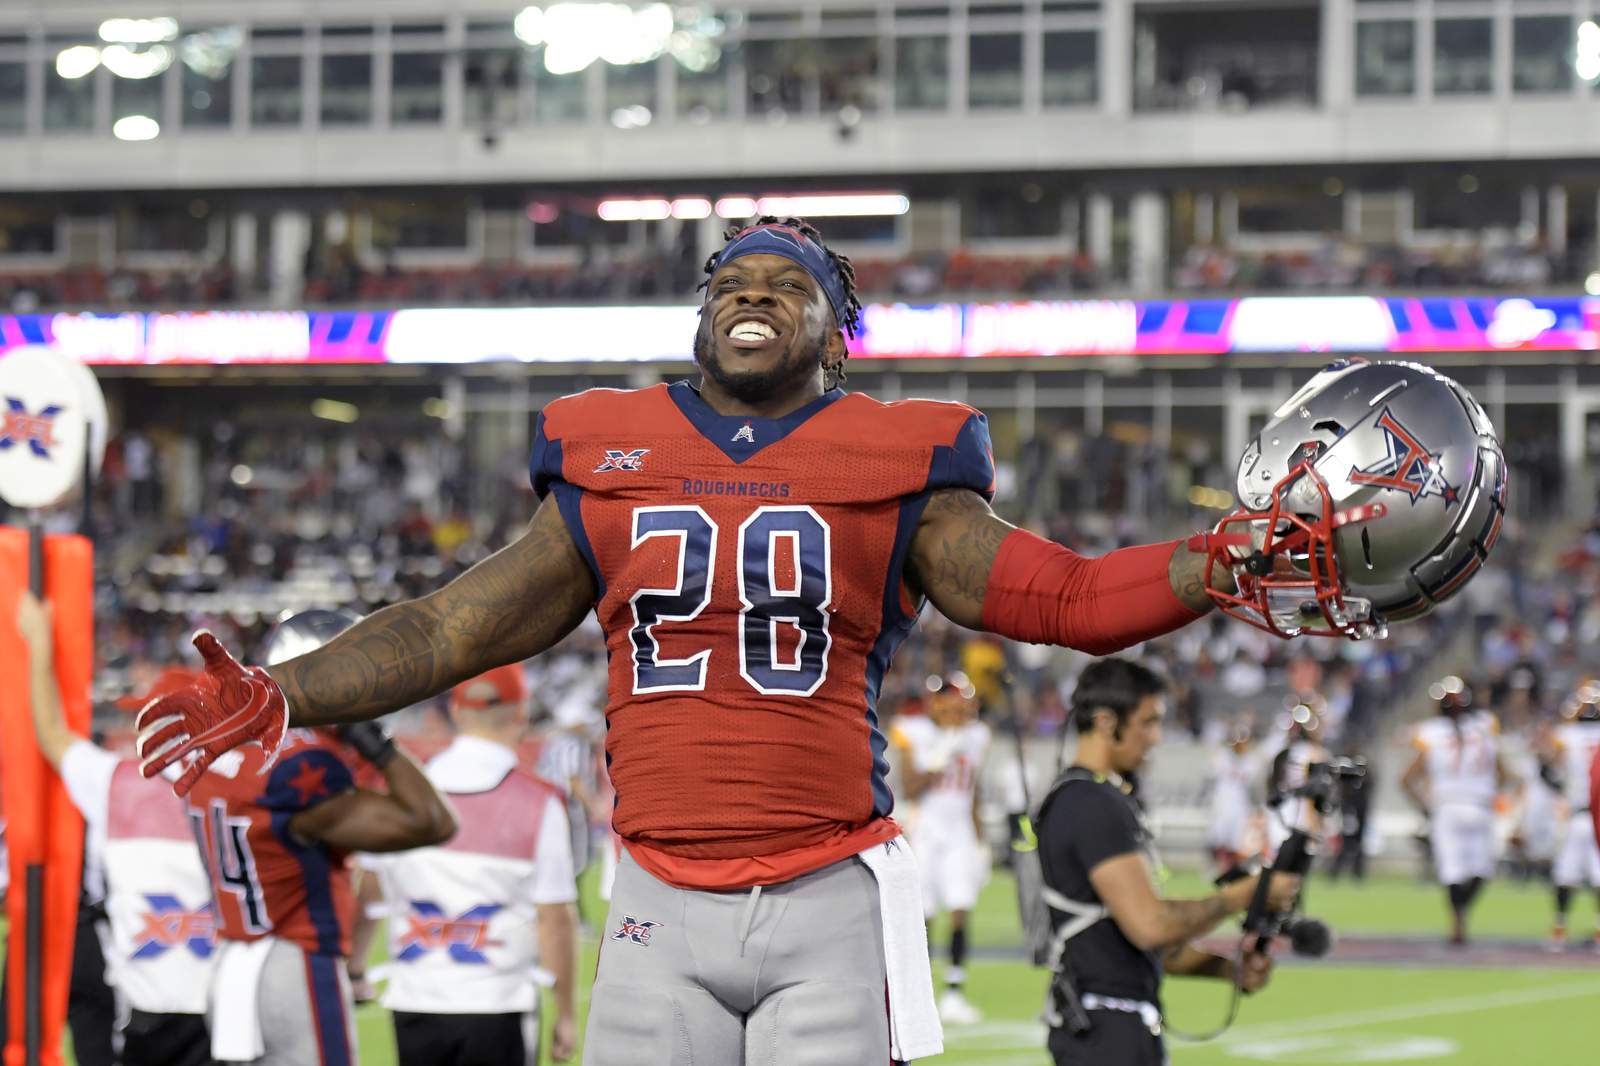 Roughnecks running back James Butler is taking advantage of XFL opportunity